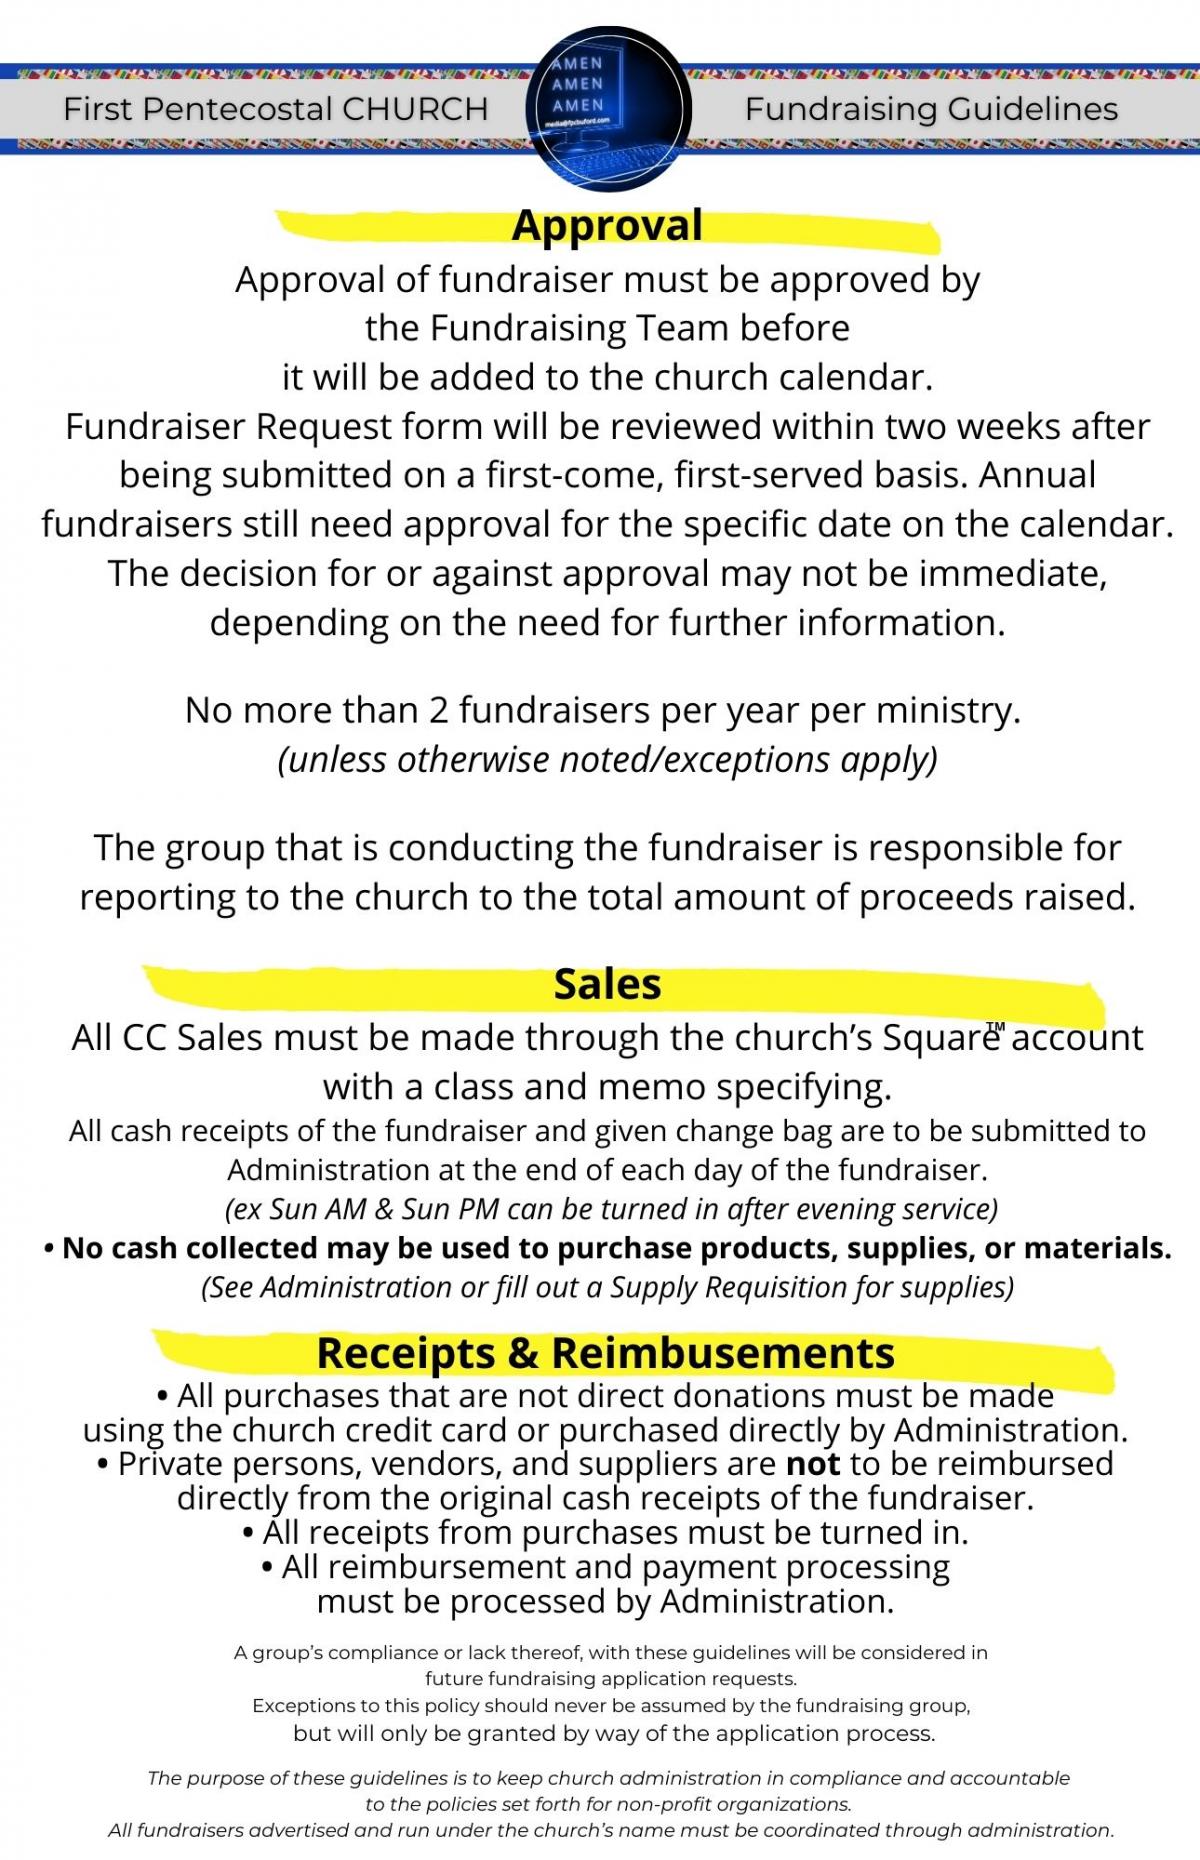 FPCB_Fundraising Guidelines.jpg